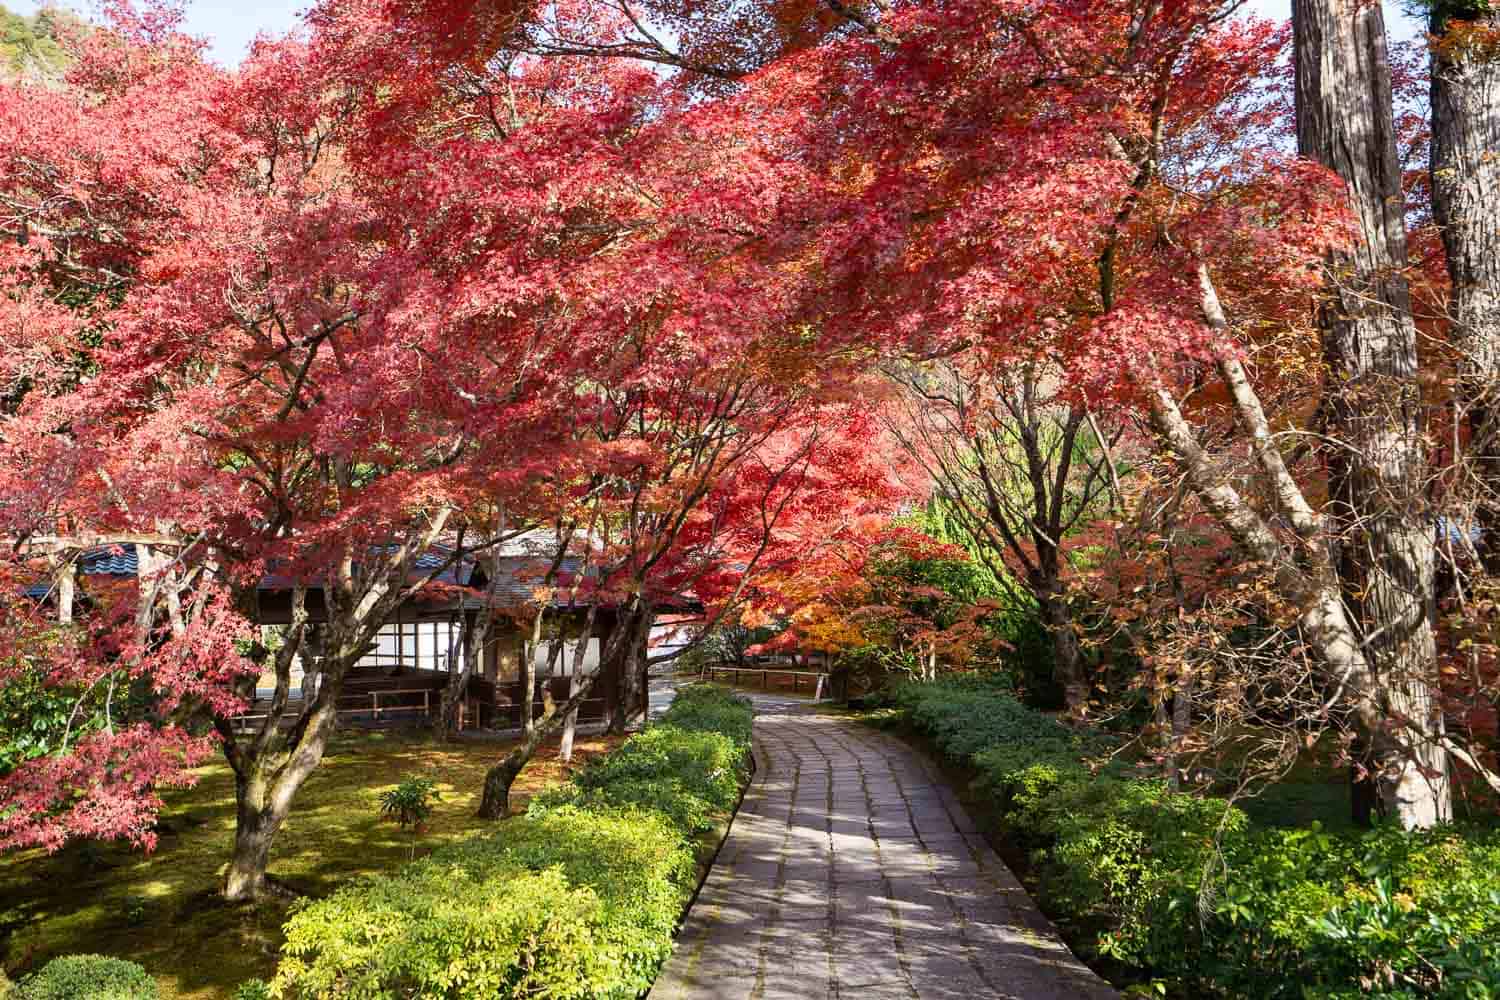 Paved path with red maple trees at Moss Temple, Kyoto, Japan